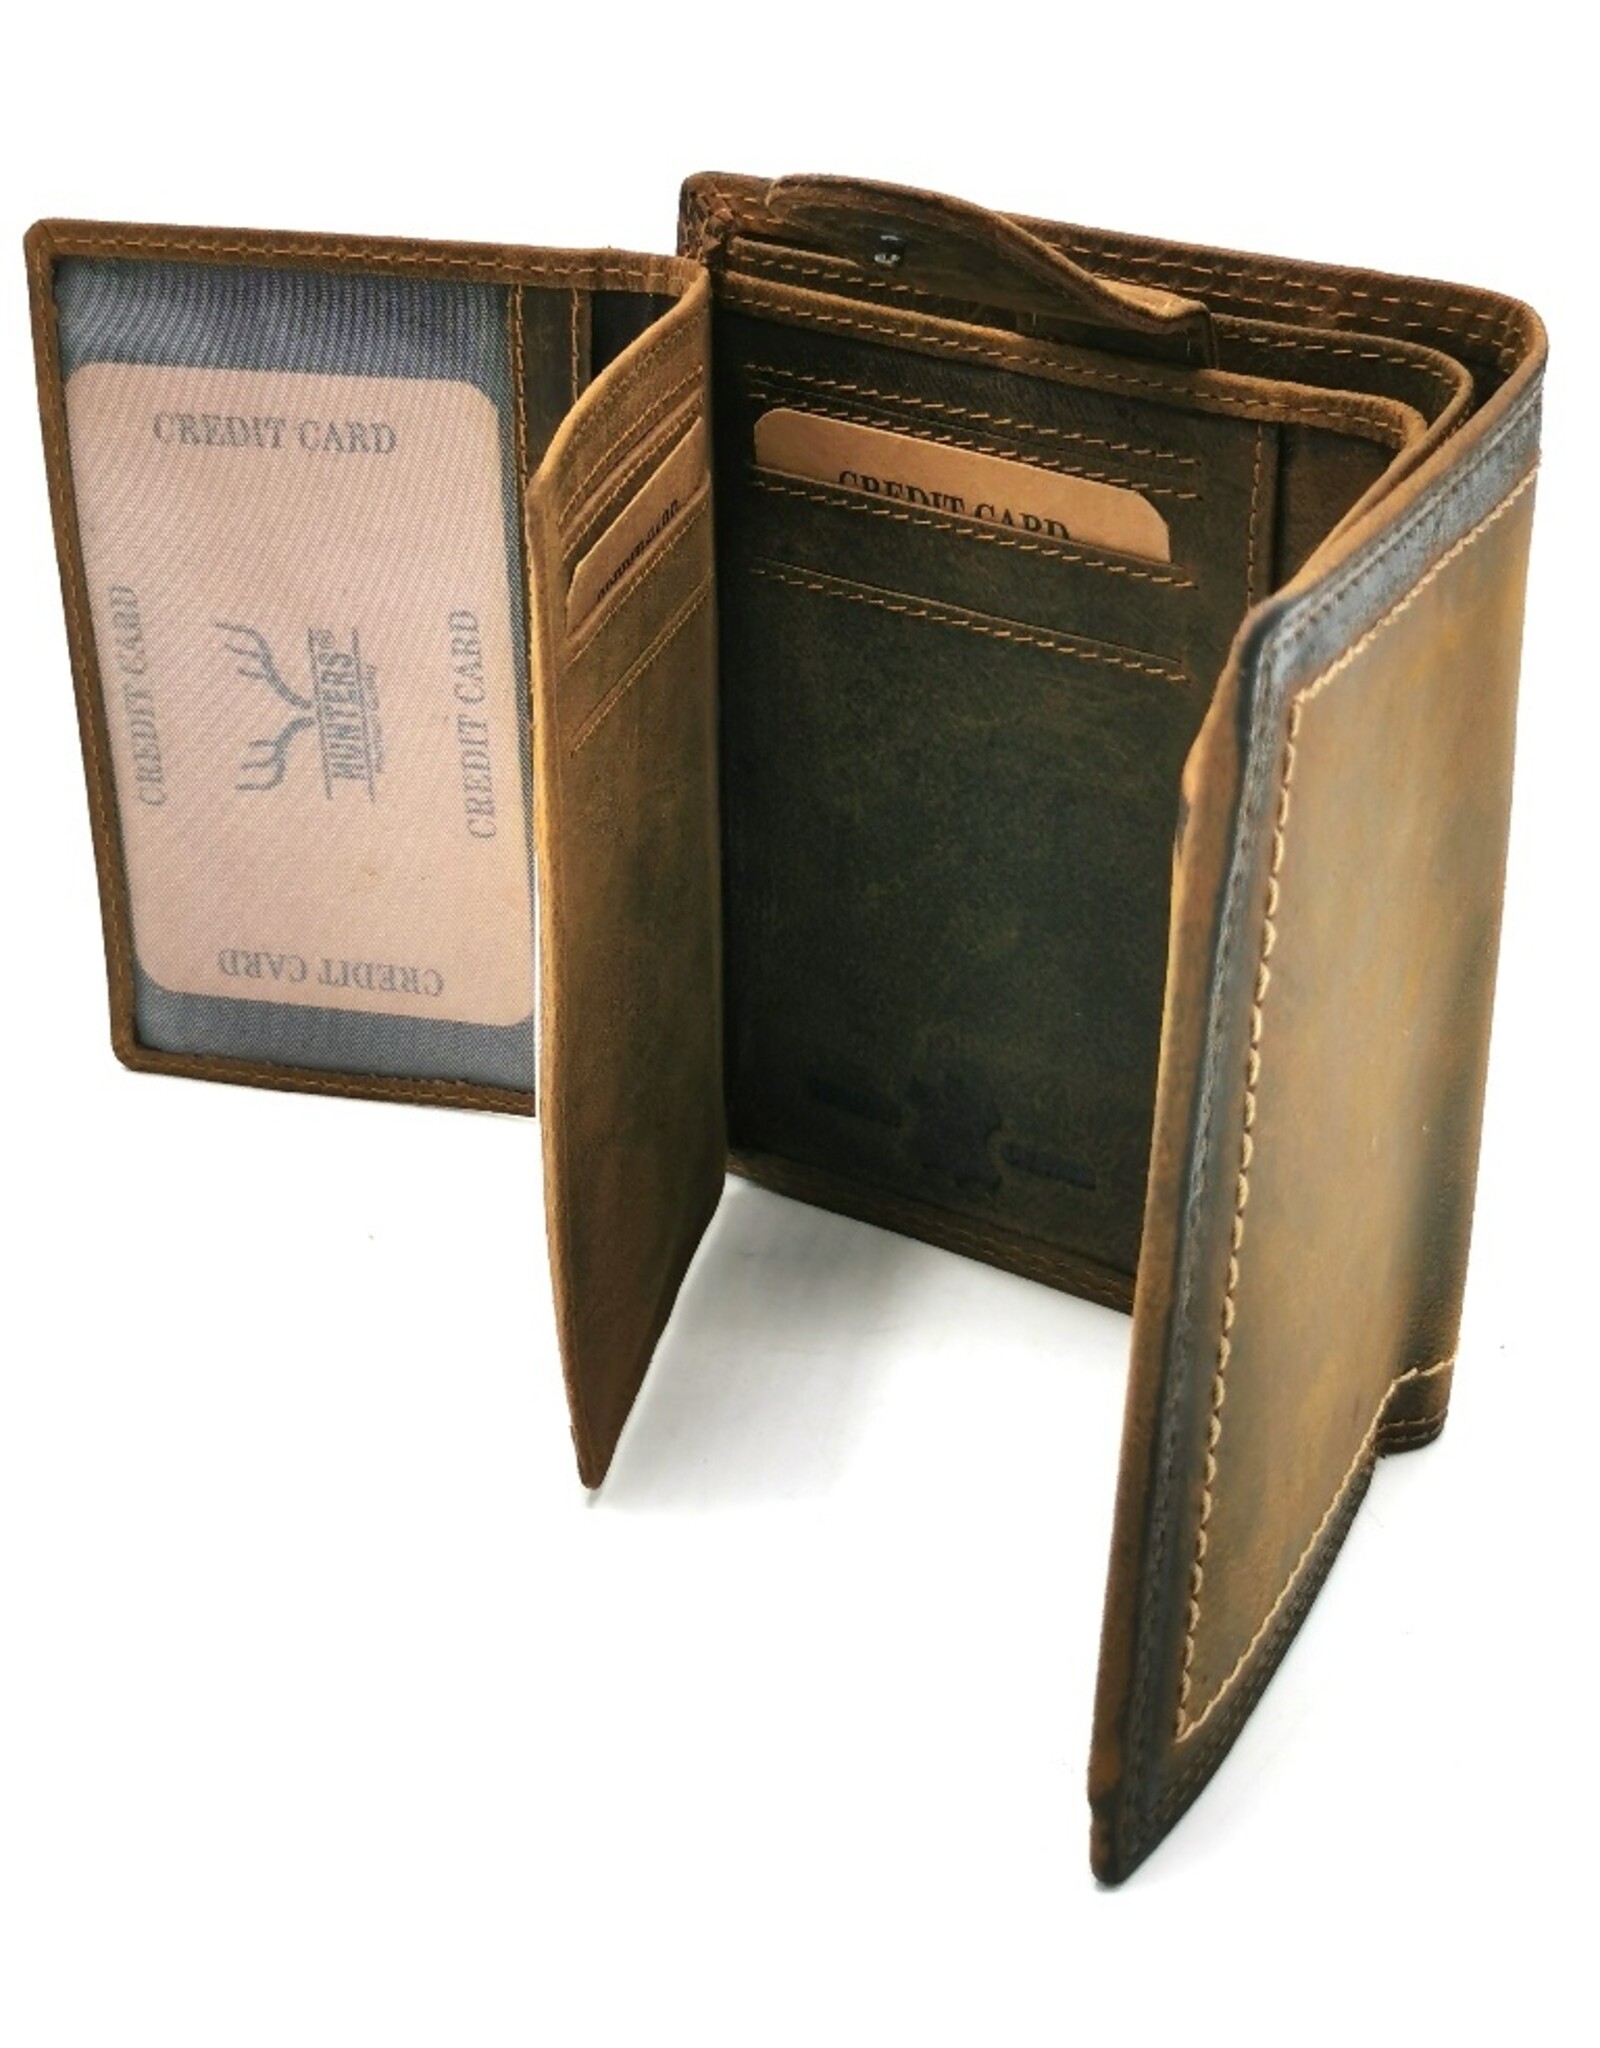 Hunters Leather Wallets - Leather Hunters Wallet with dark border vertical